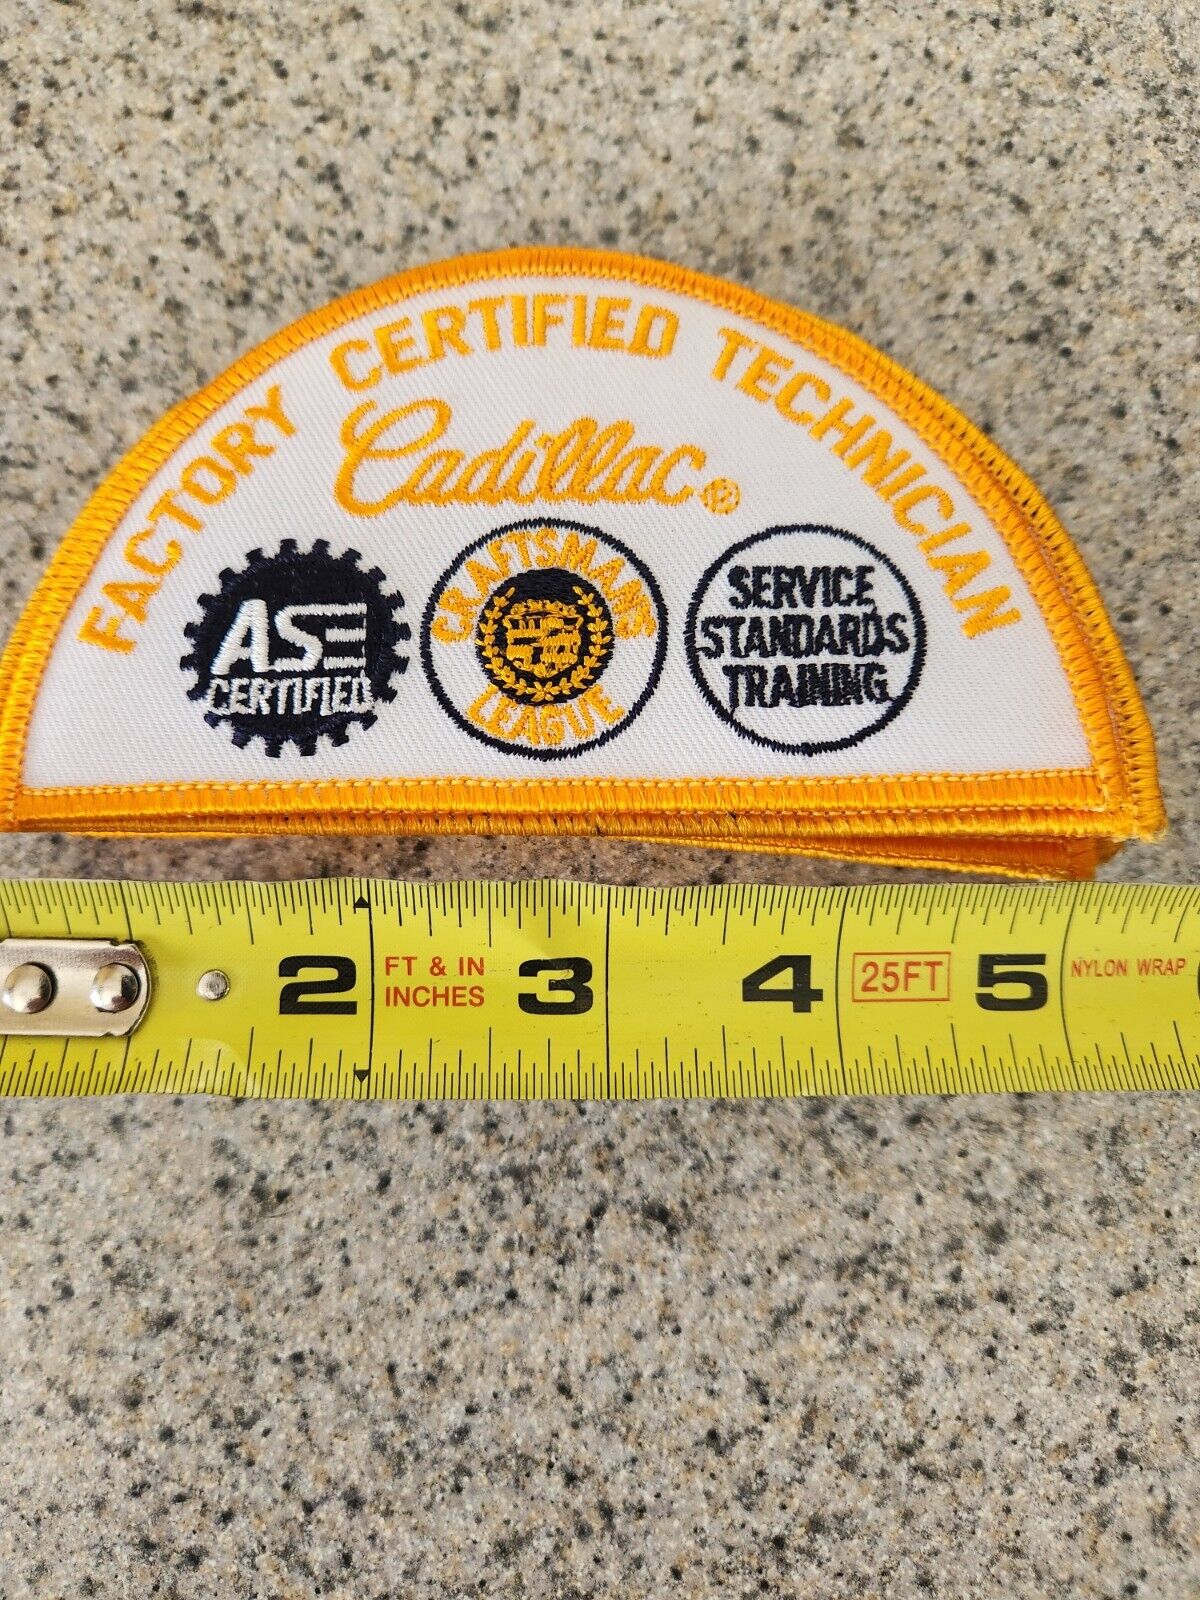 Cadillac Factory Certified Technician/ASE/Craftsmans League Embroidered Patch